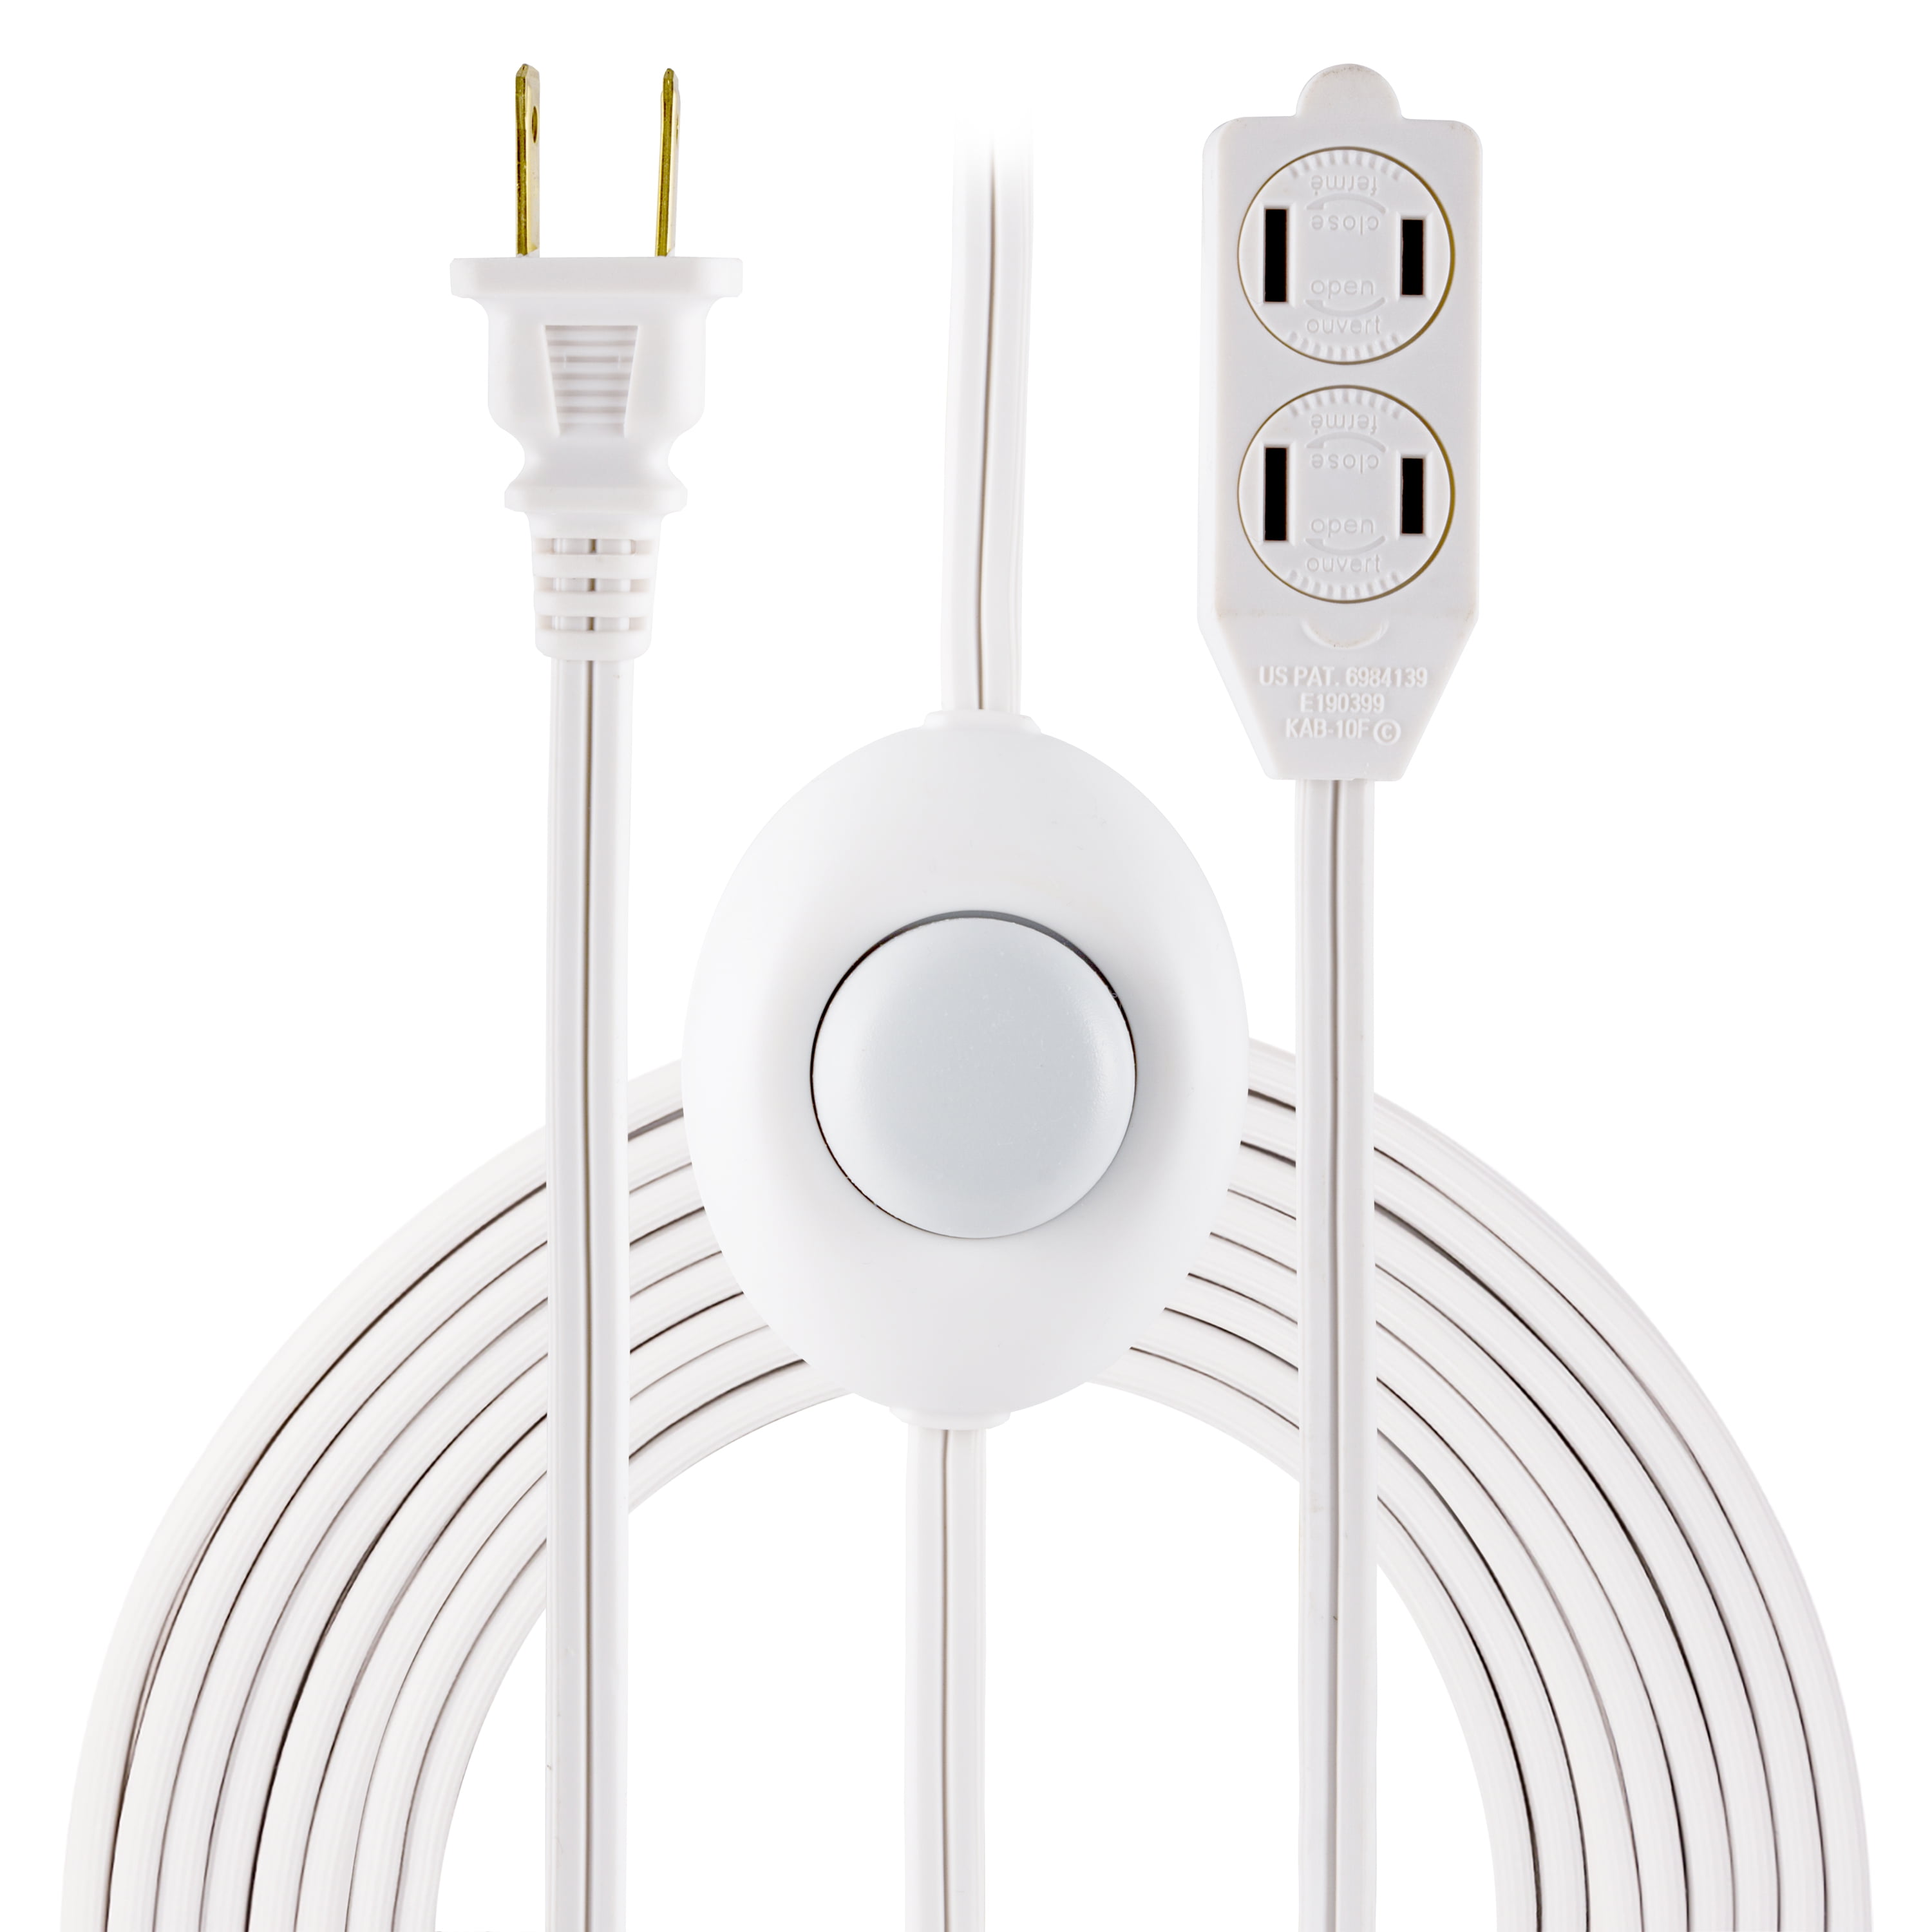 PRIME HOUSEHOLD CORD WHITE 6 FT" 3-OUTLET CABLE TV EXTENSION FOR FAN LIGHT